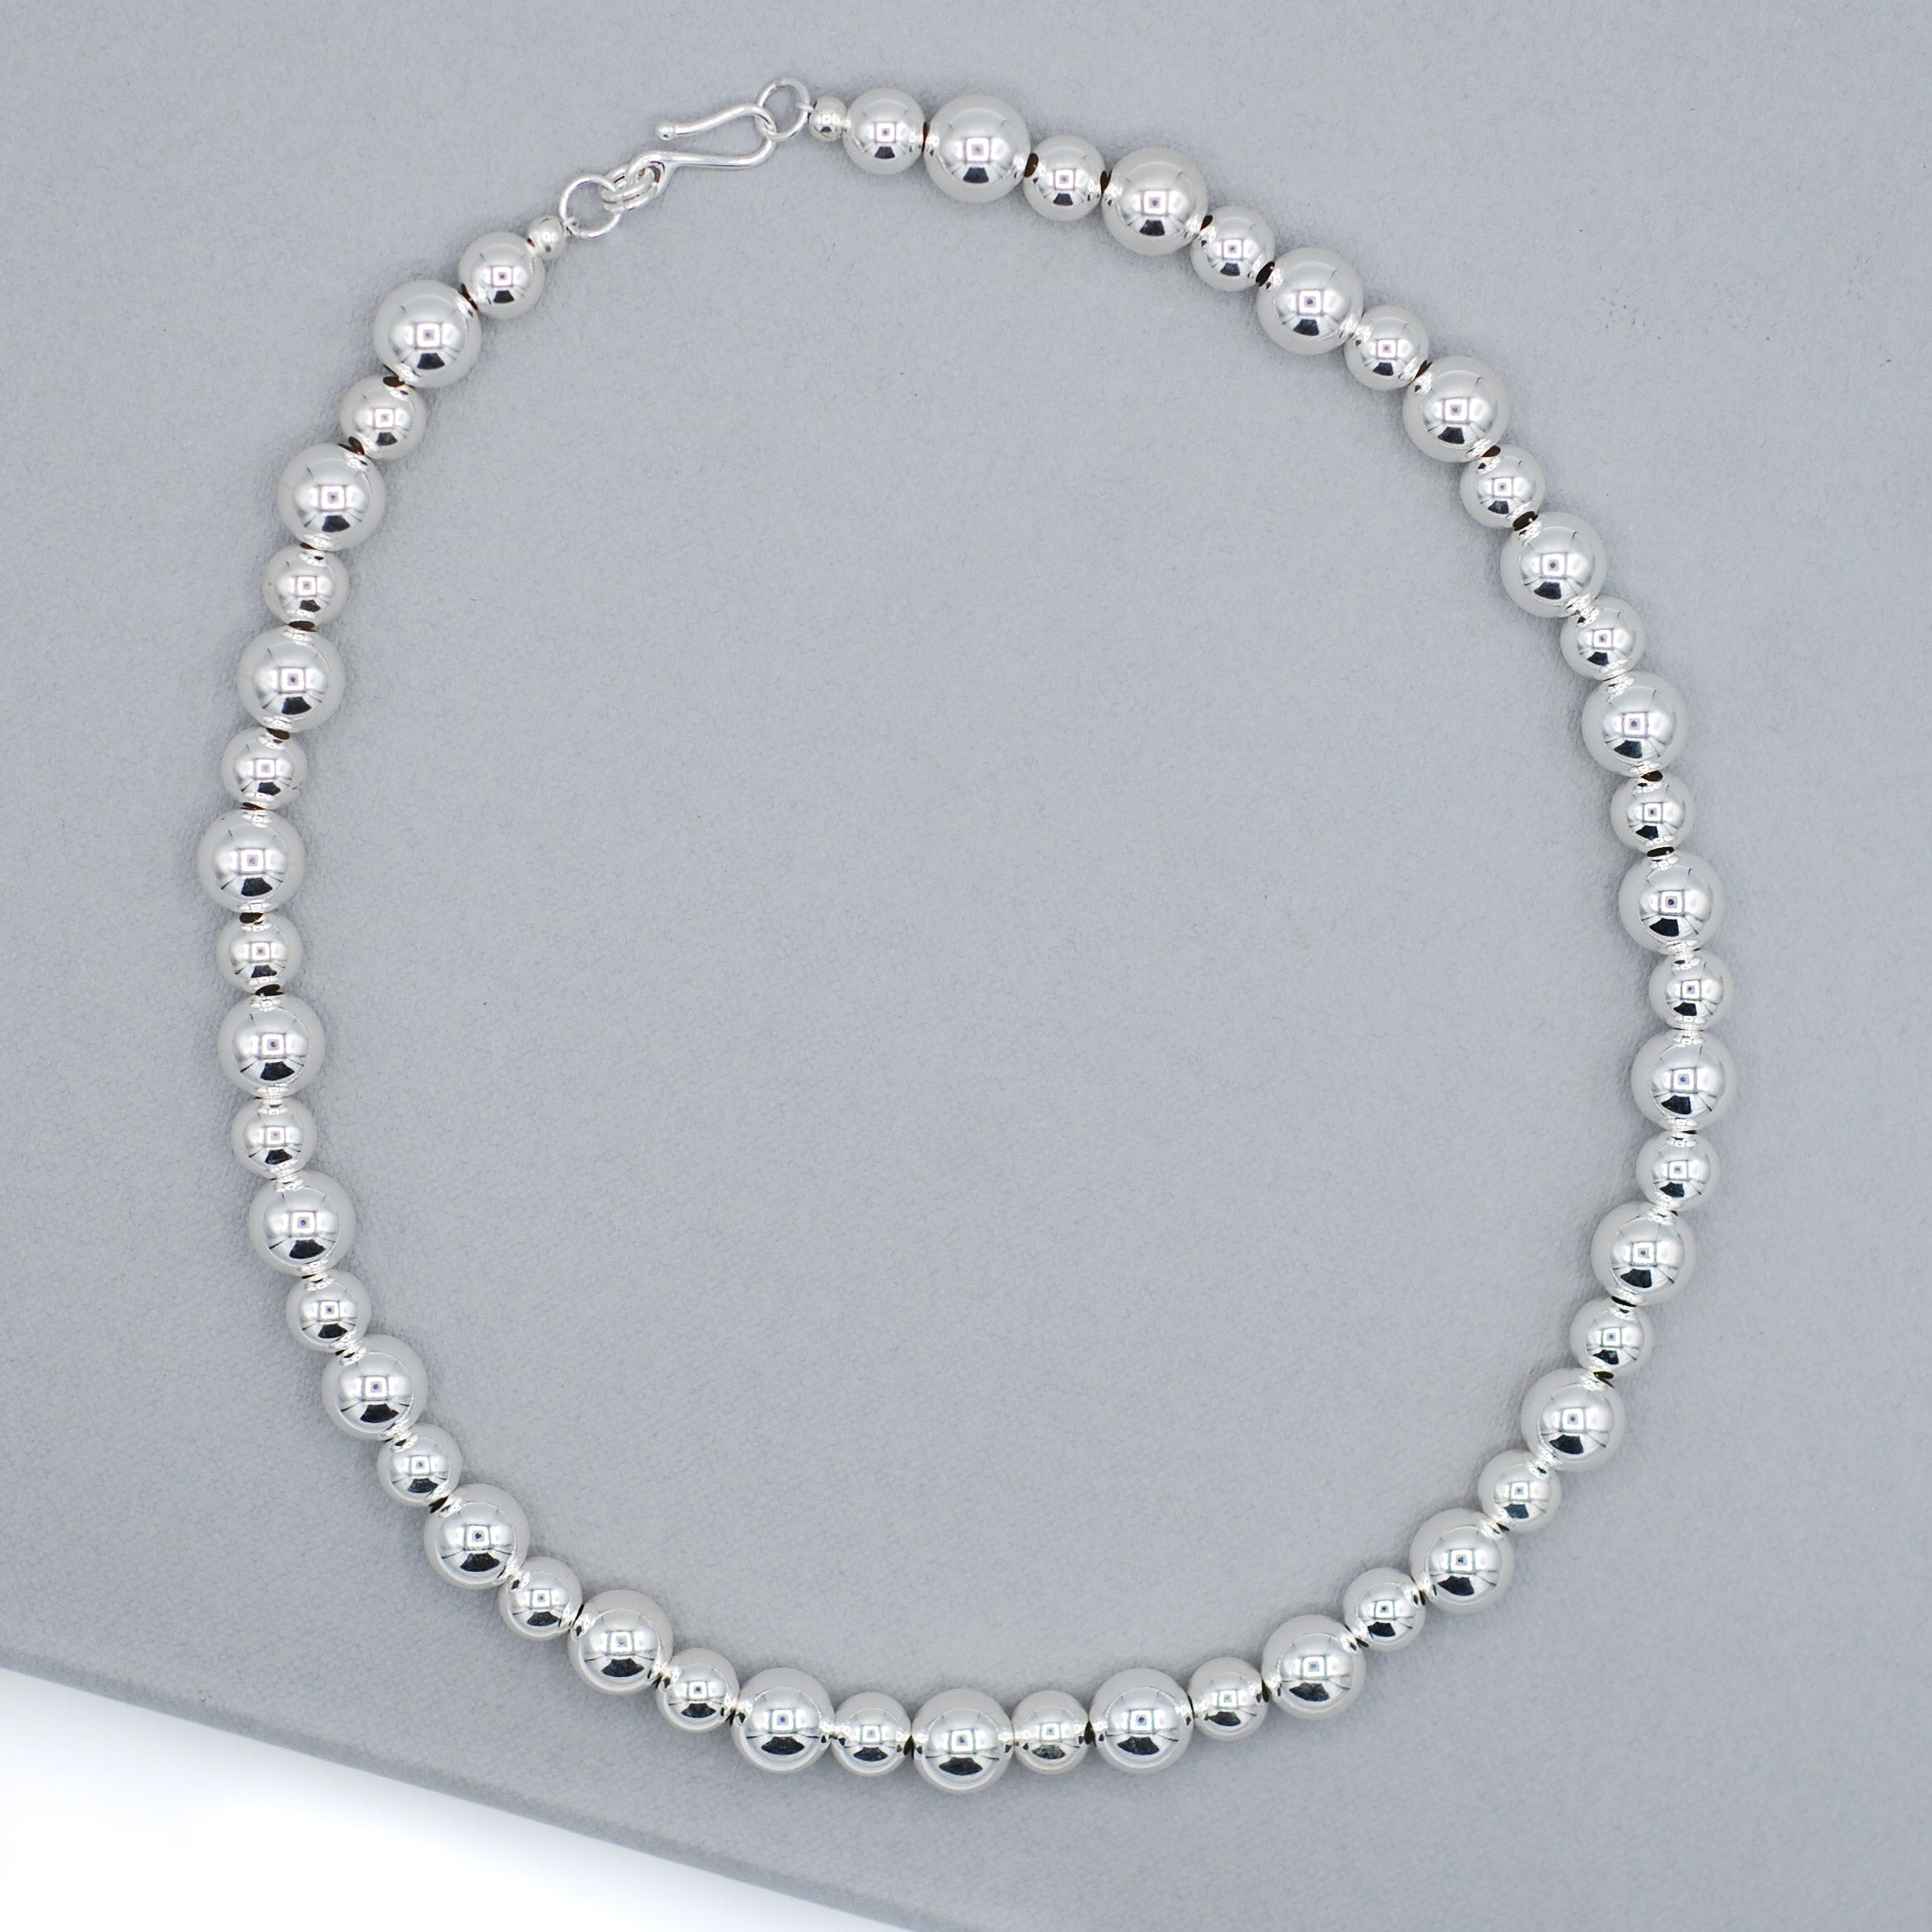 6mm & 10mm Sterling Silver Beaded Necklace